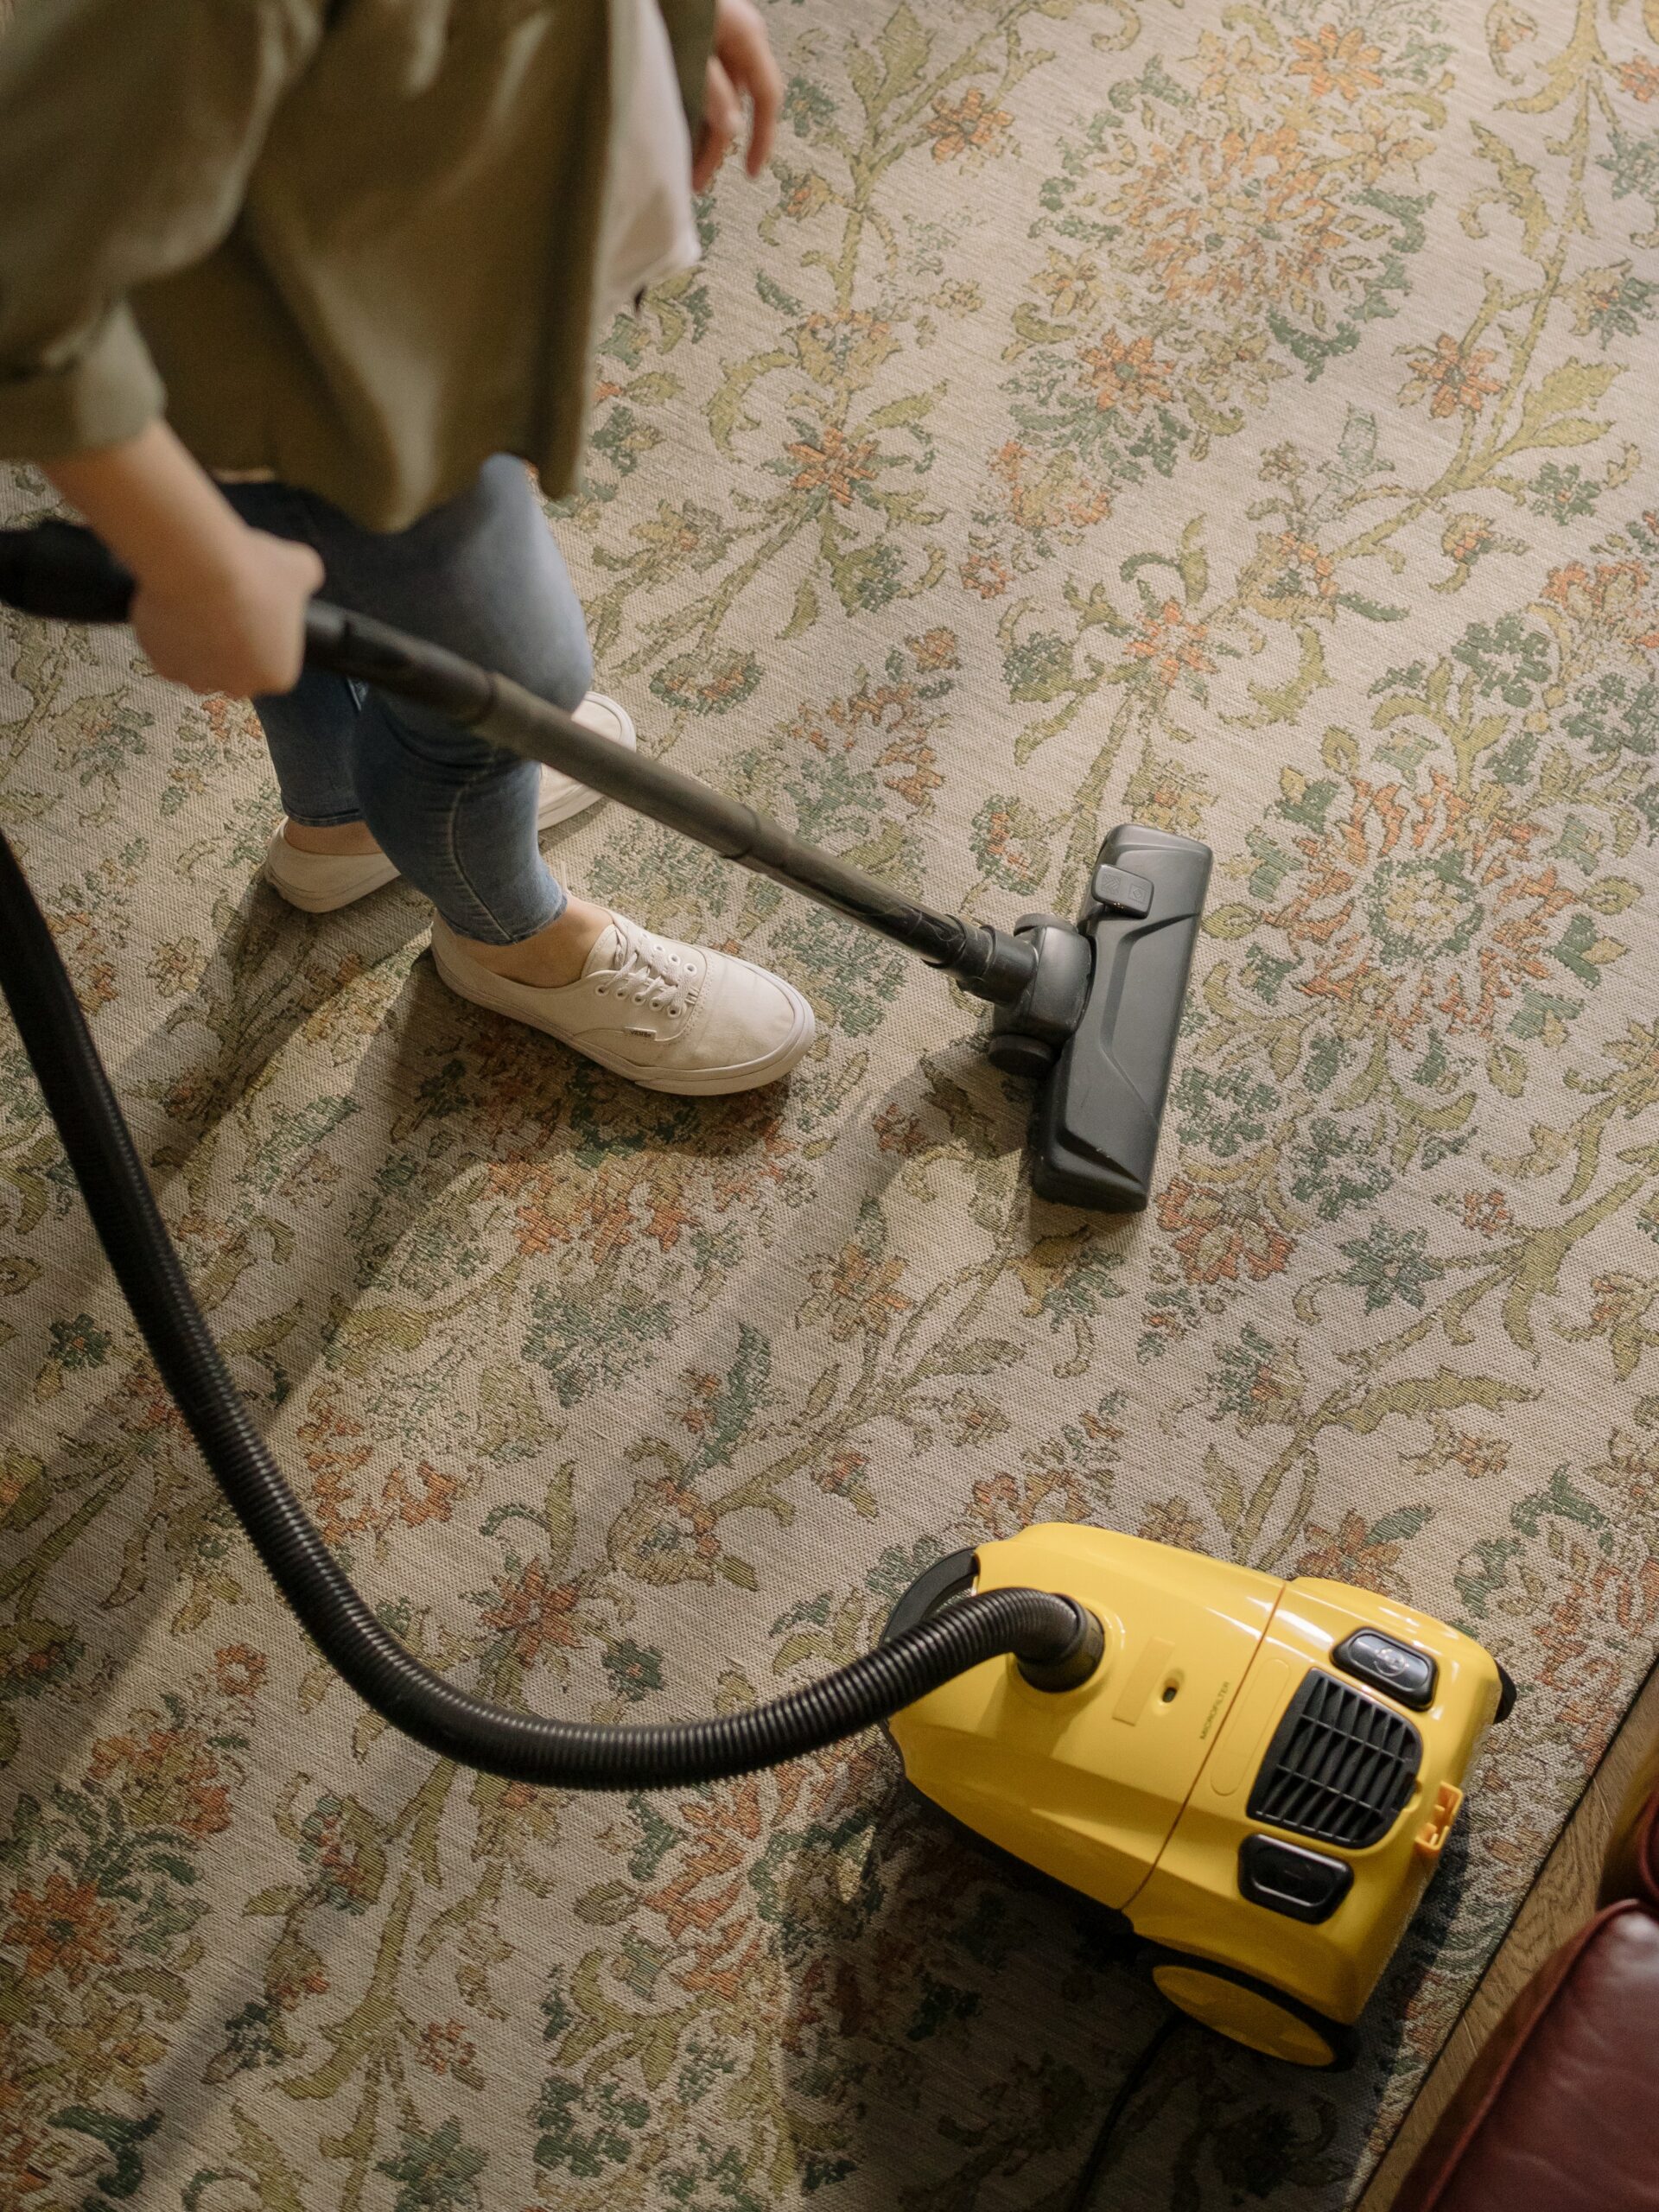 Professional Carpet Cleaning Vs. DIY: What’s Best for Your Home and Budget